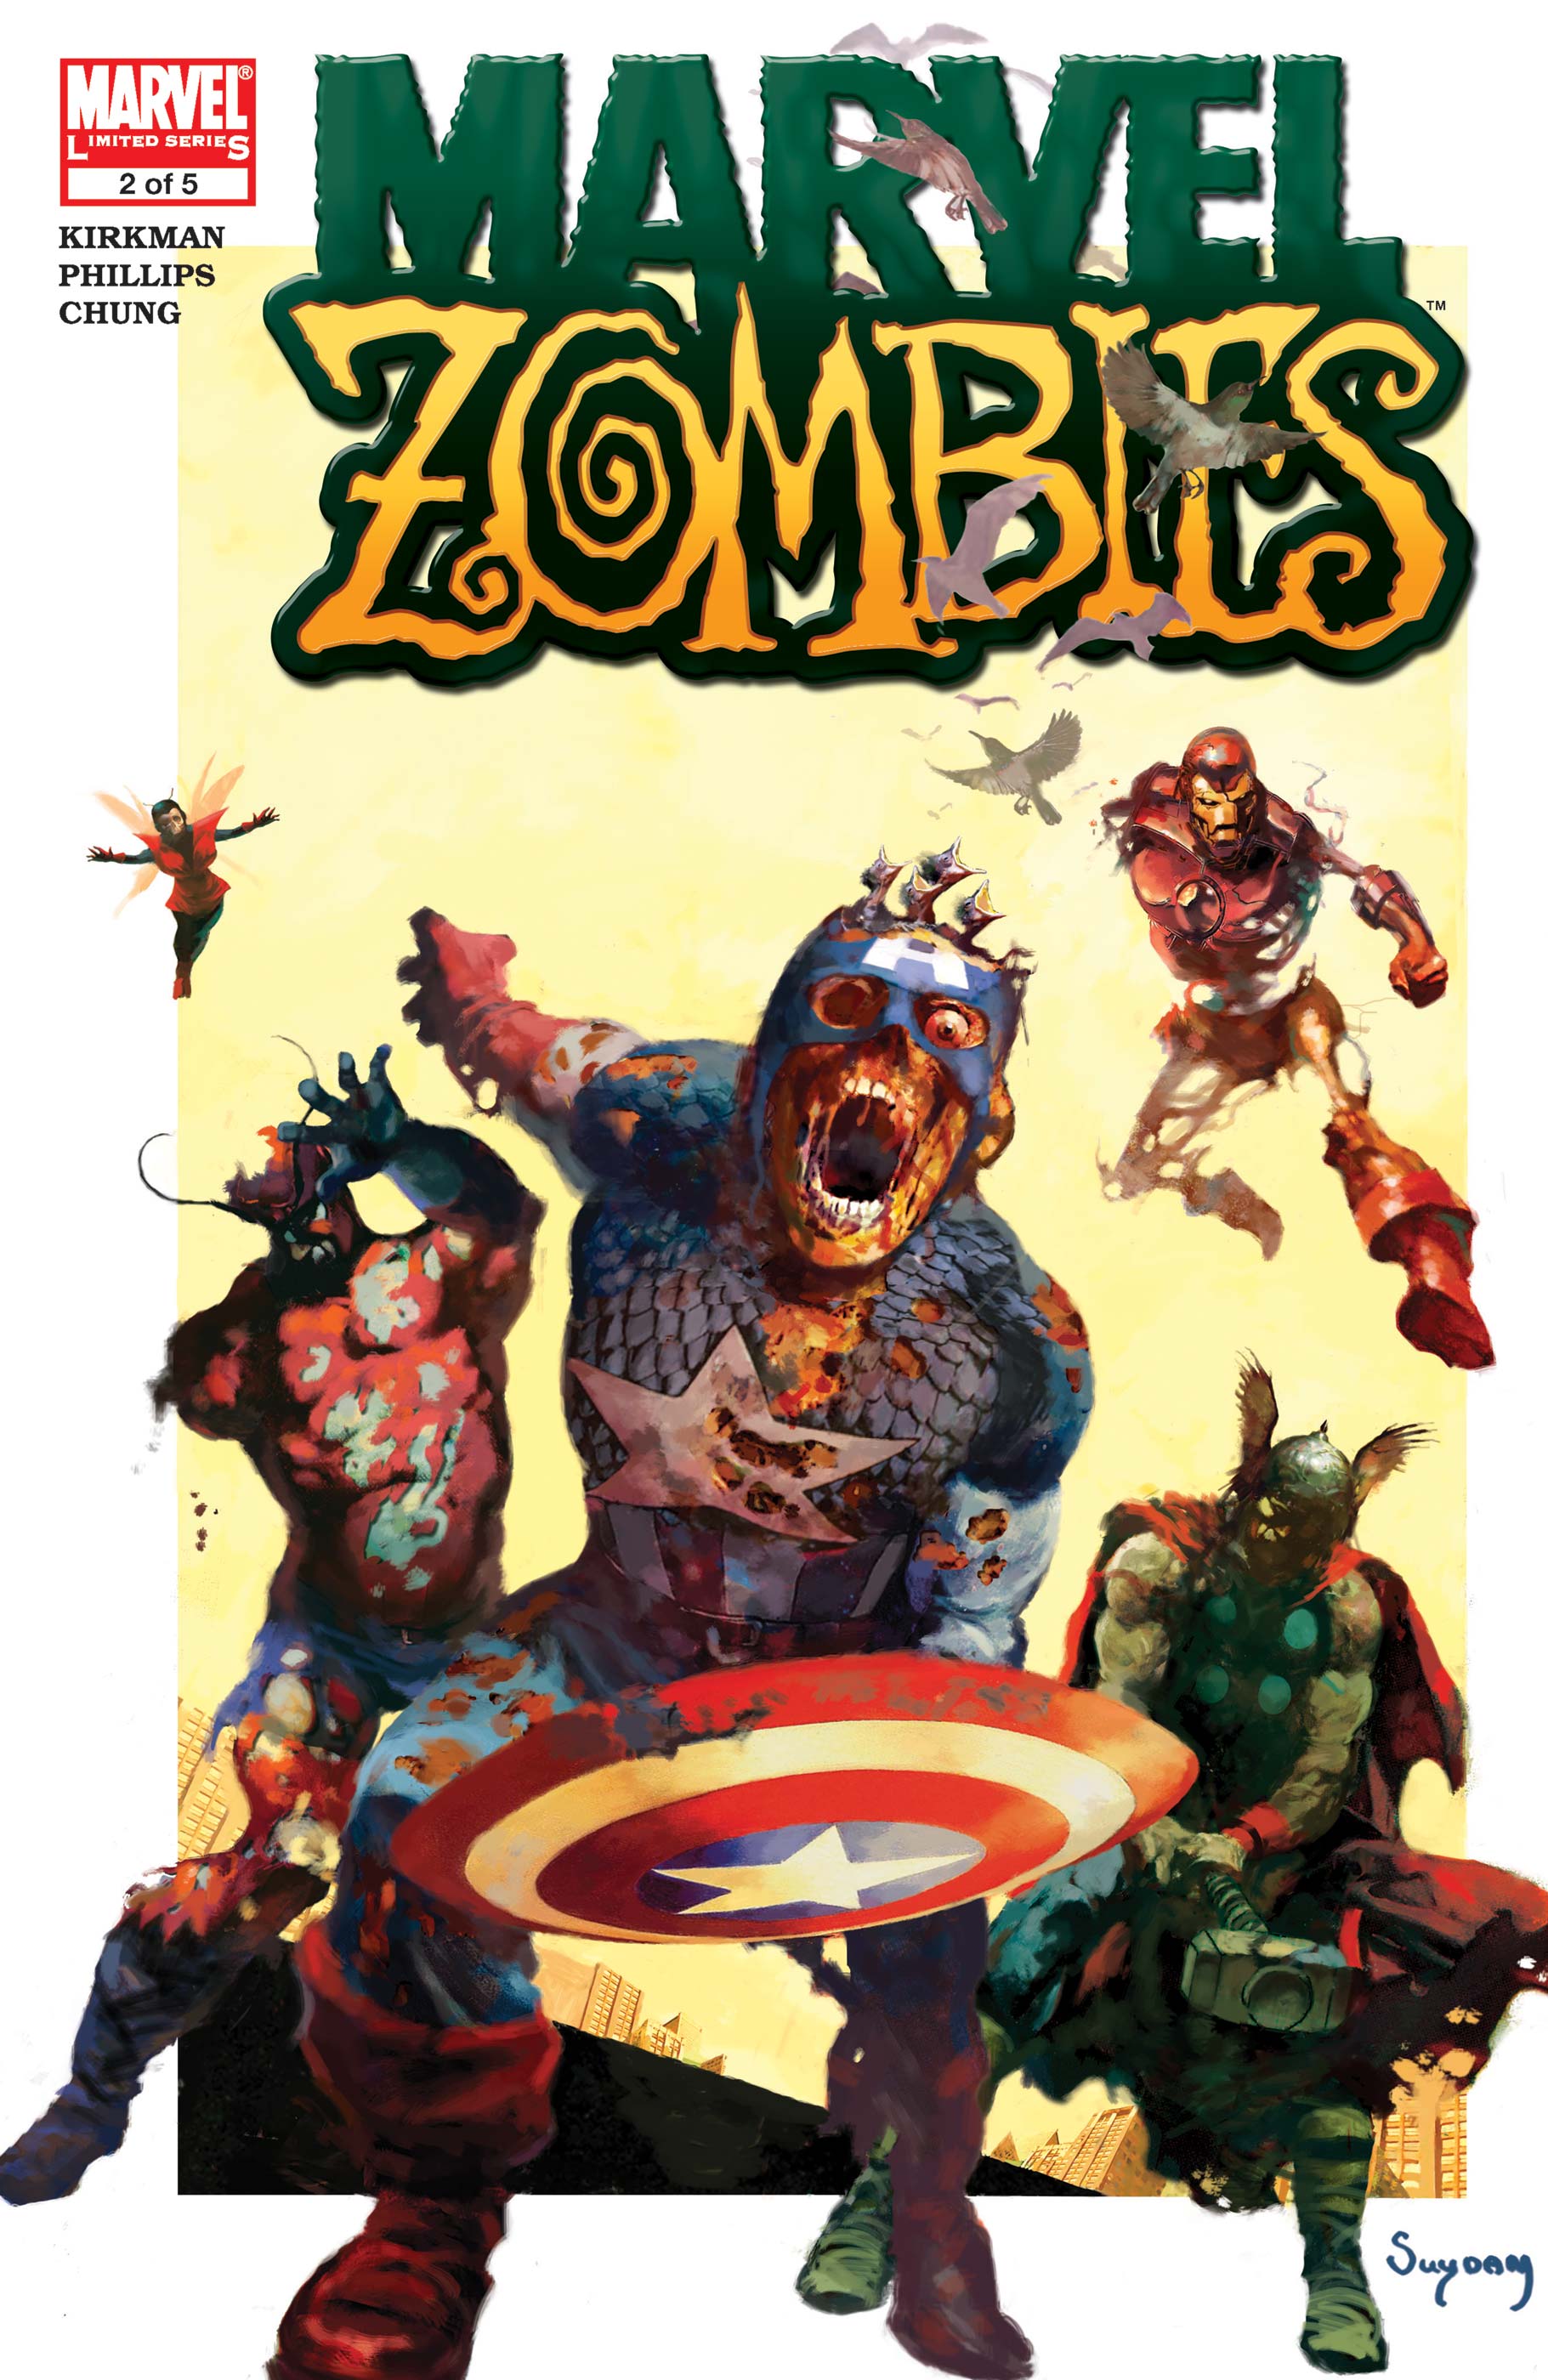 Marvel Zombies #5 July 2006 Marvel Comics SILVER SURFER Cover Kirkman Phillips 